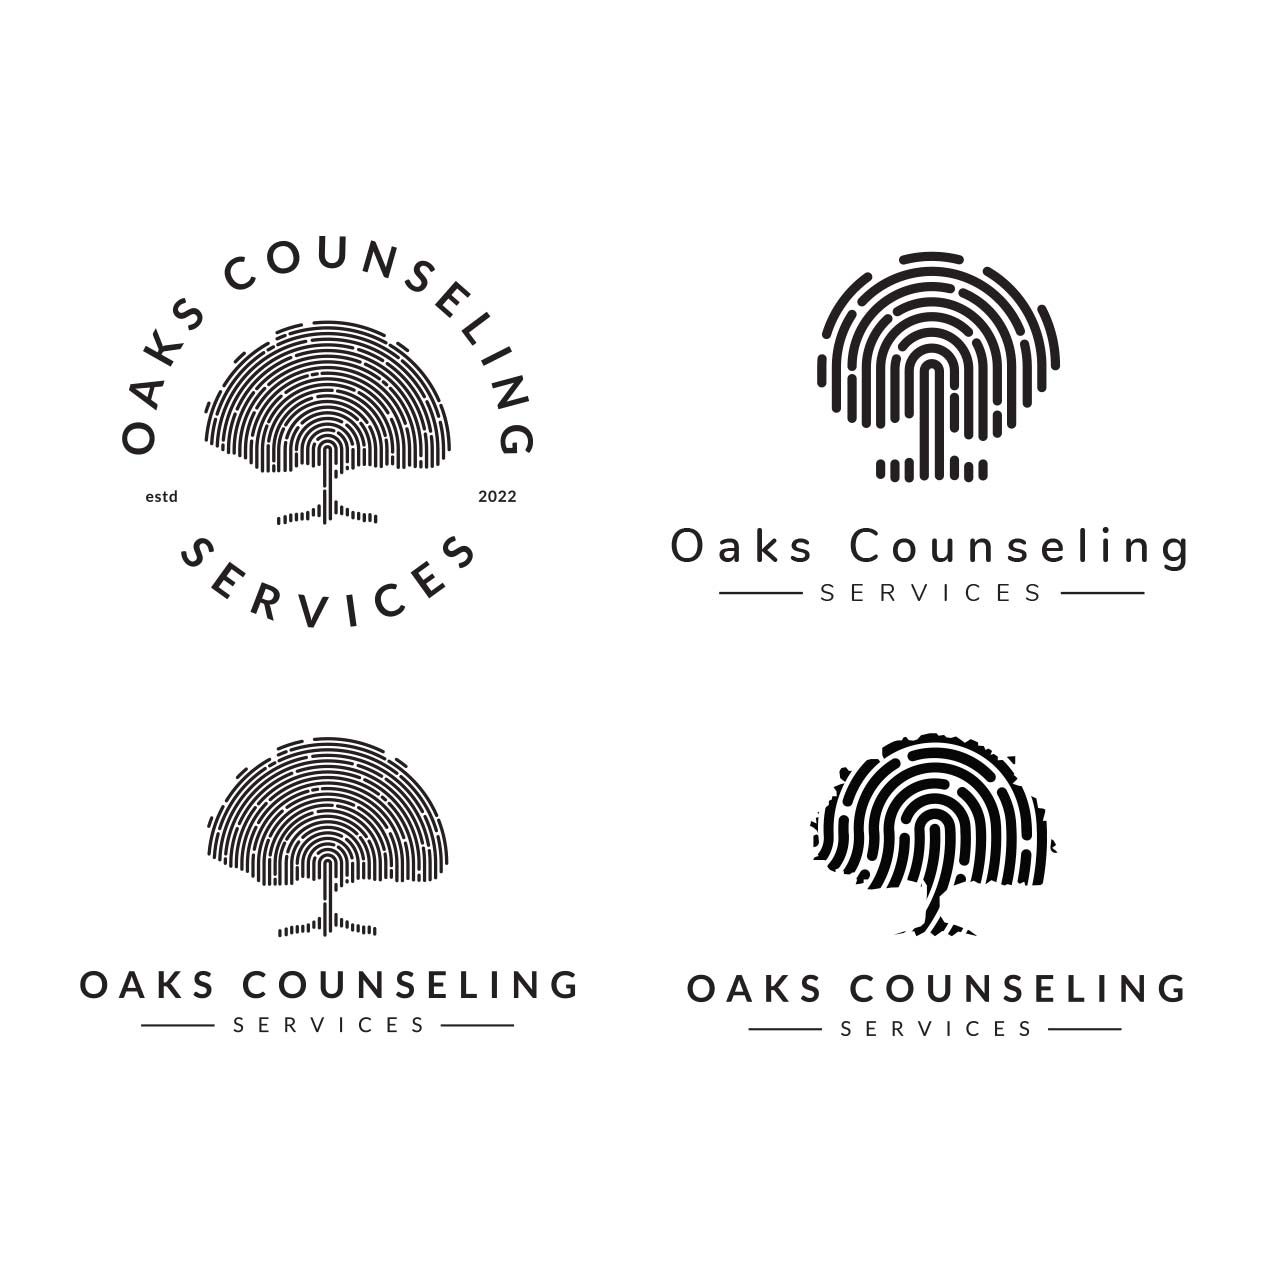 Oaks Counseling Services